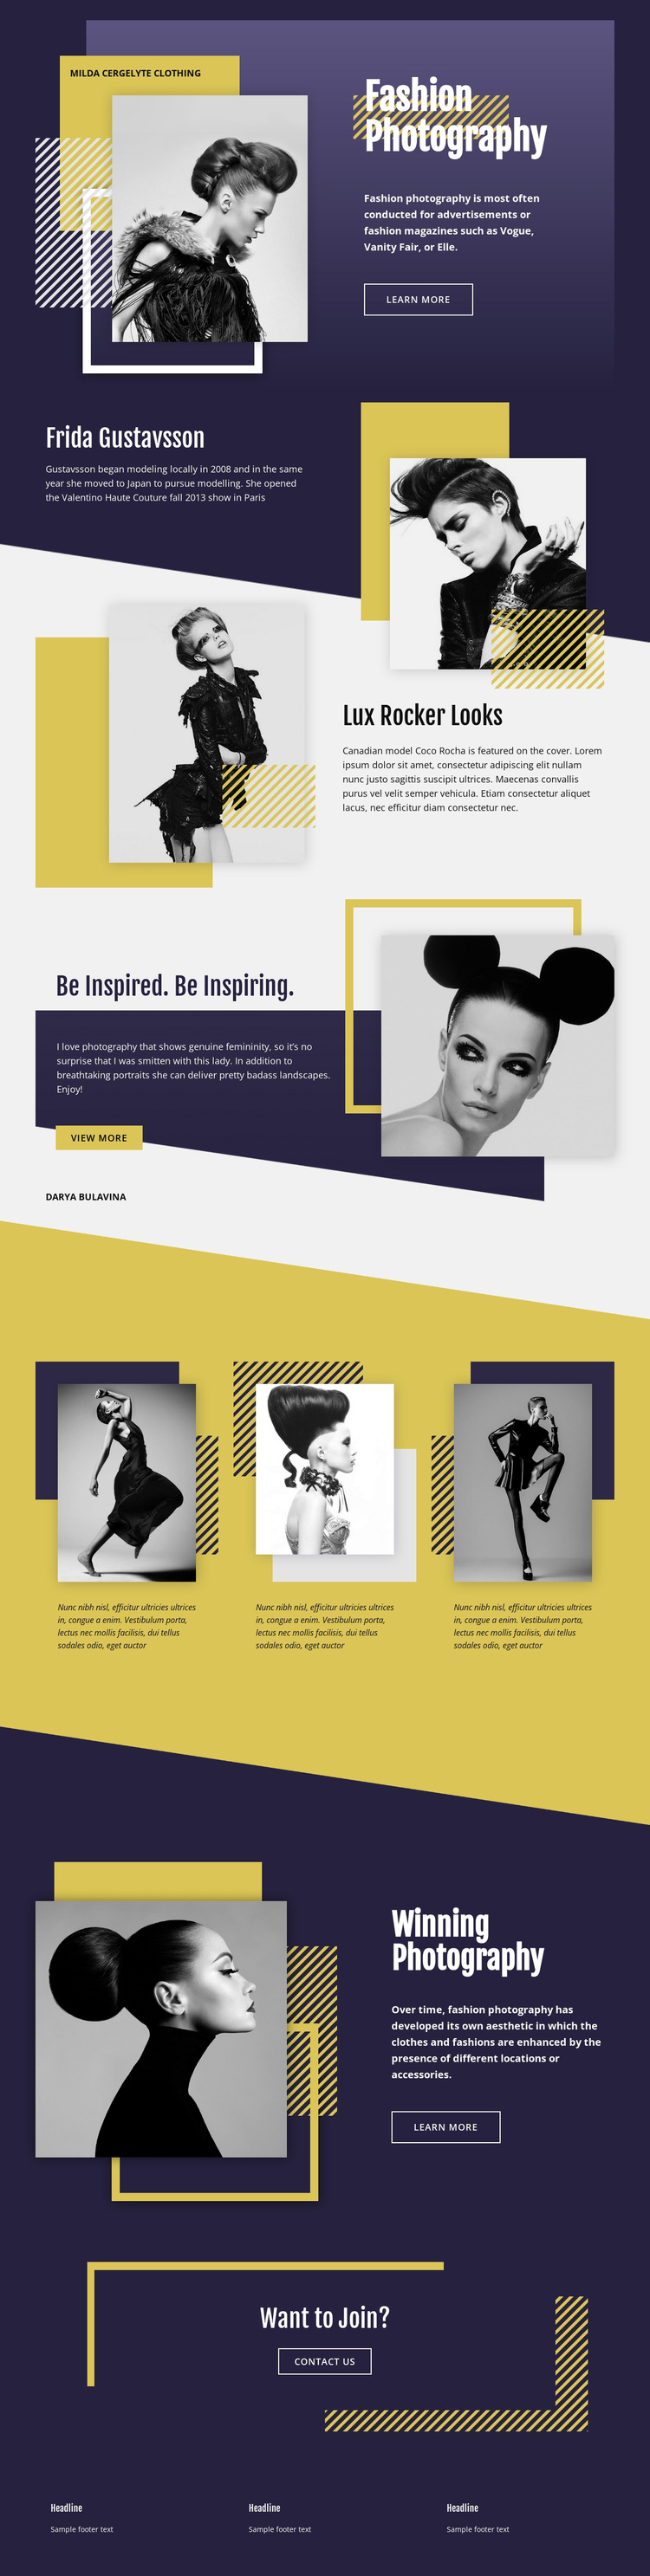 Fashion Photography Overlapping Joomla Page Builder